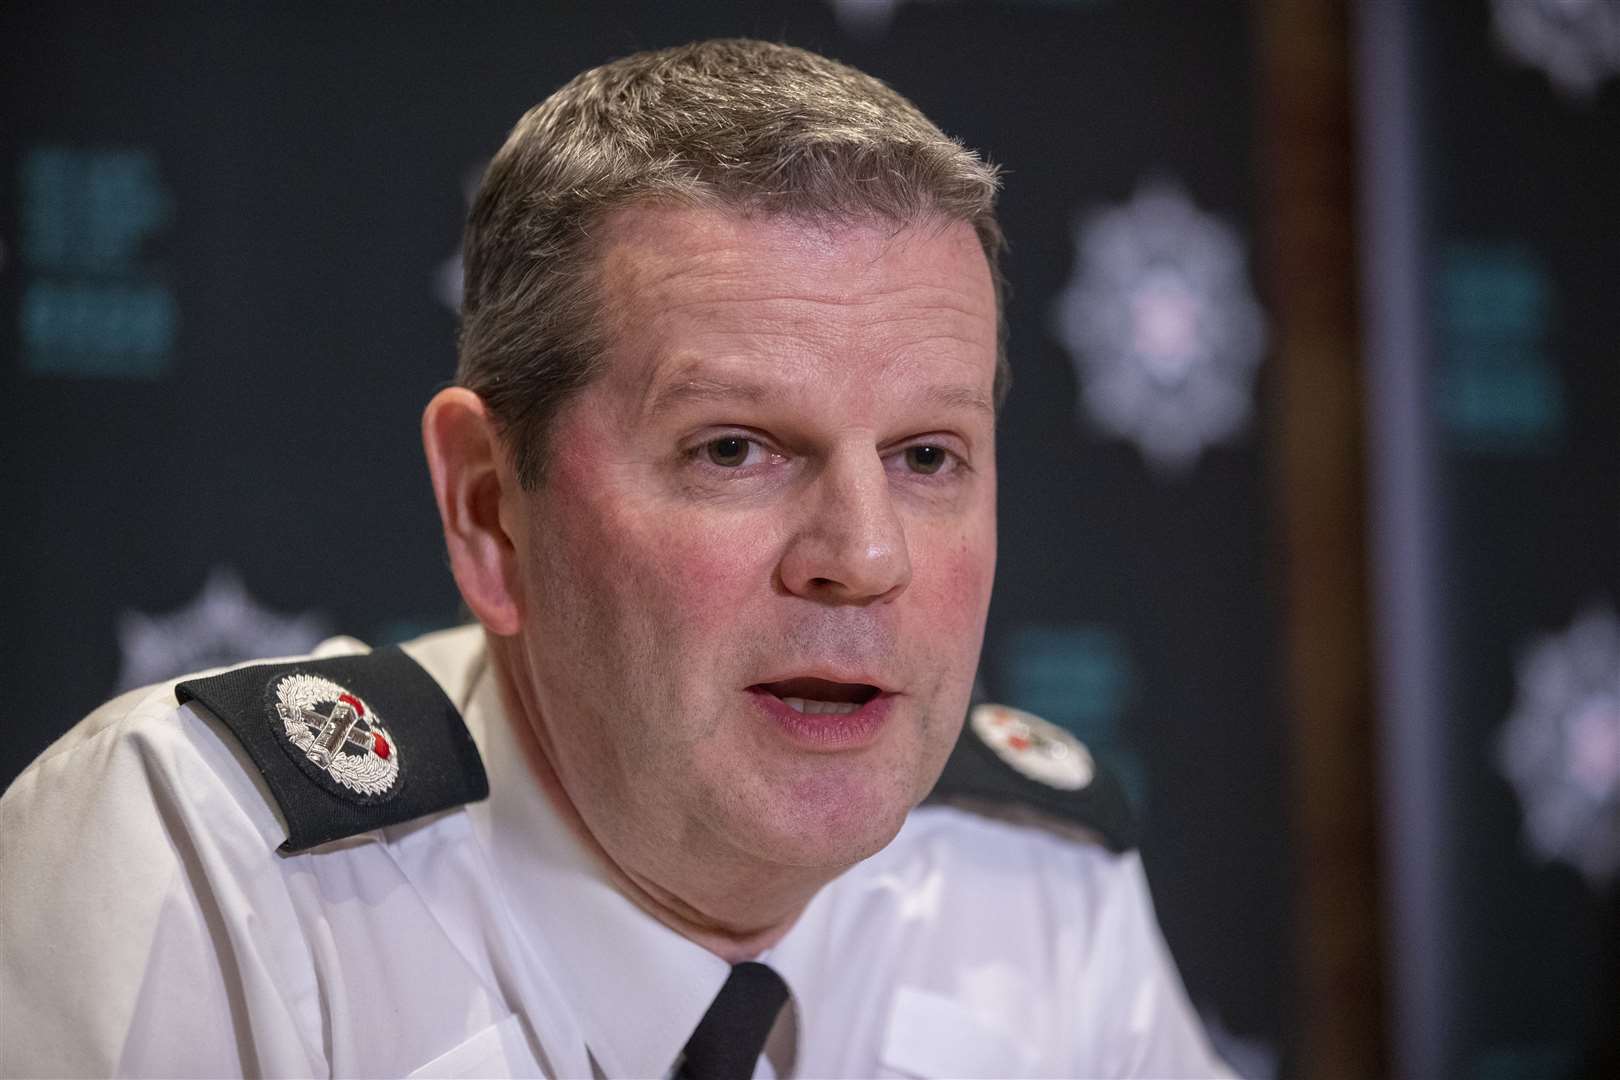 Police Service of Northern Ireland (PSNI) ACC Chris Todd thanked the public for their understanding during the security operation (Liam McBurney/PA)